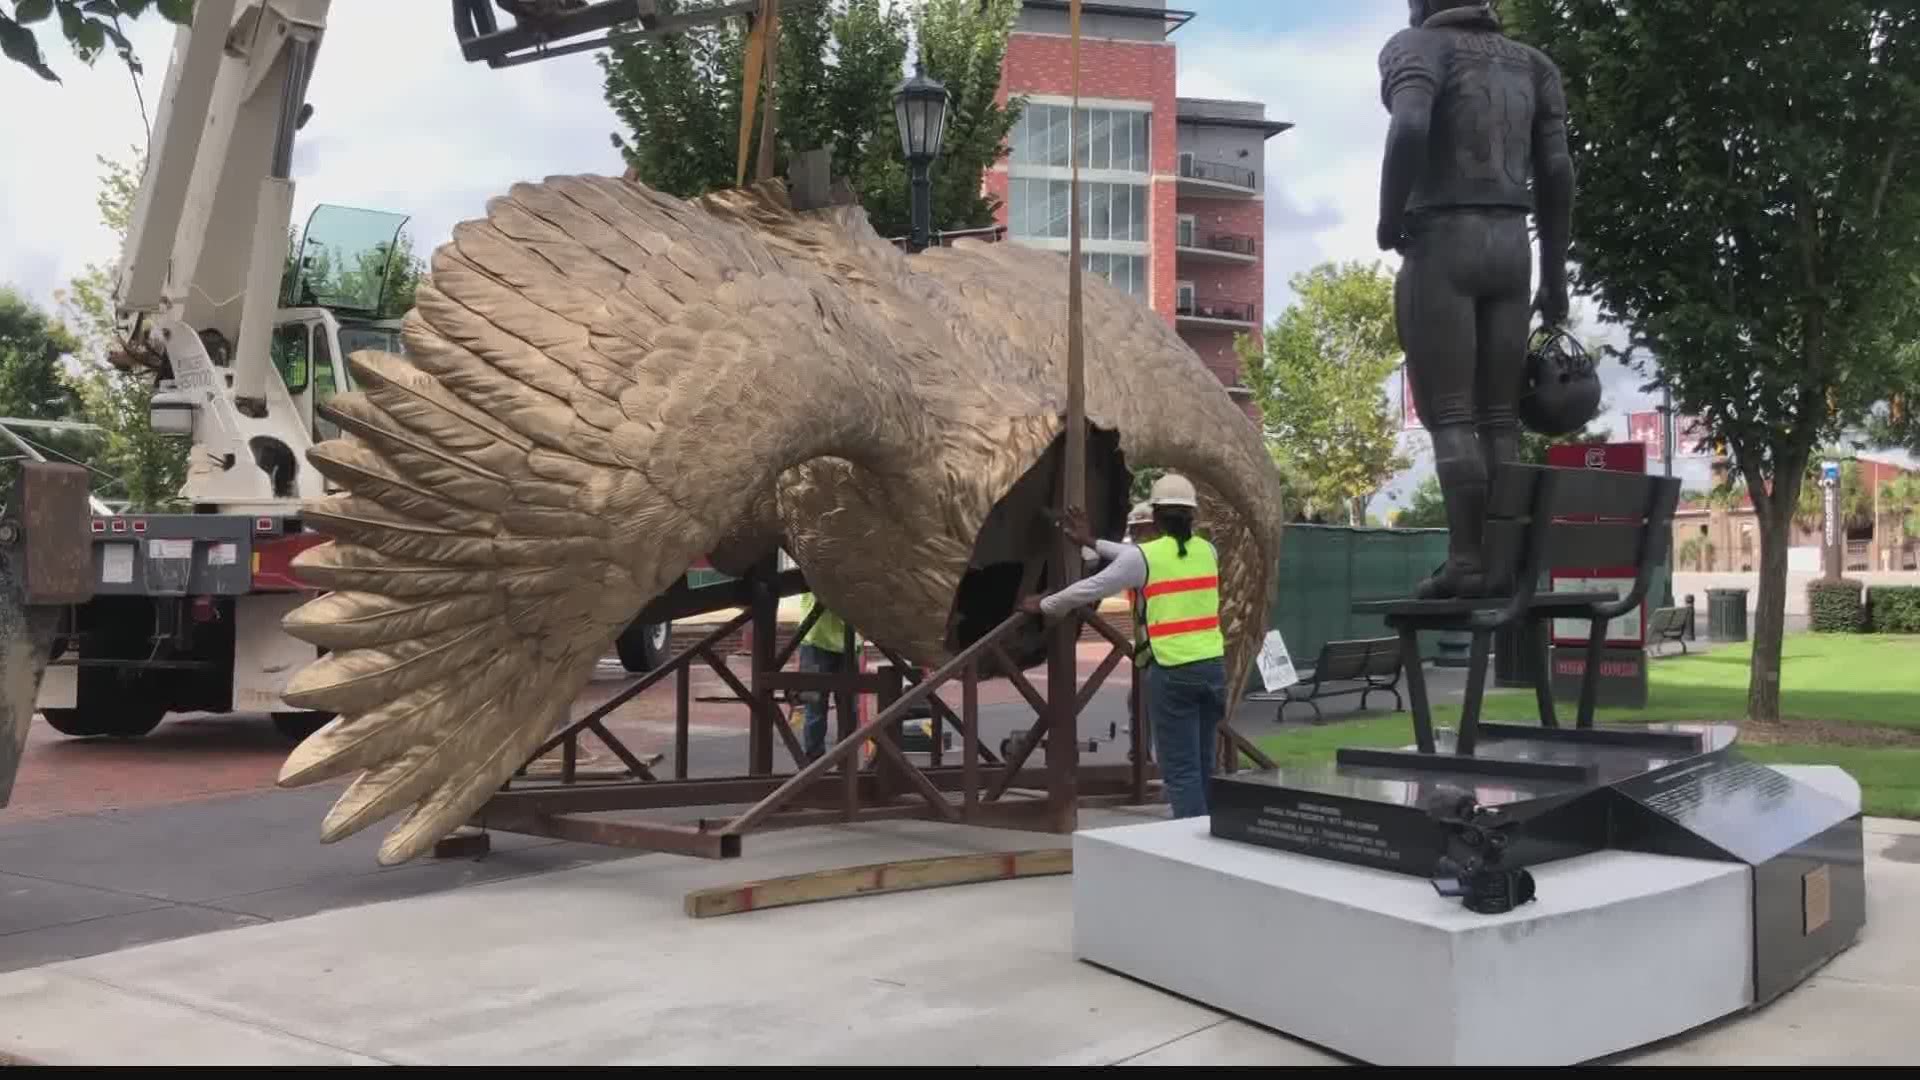 A 20 foot wide, 10 ton sculpture of the South Carolina Gamecocks mascot has arrived at Williams-Brice Stadium.